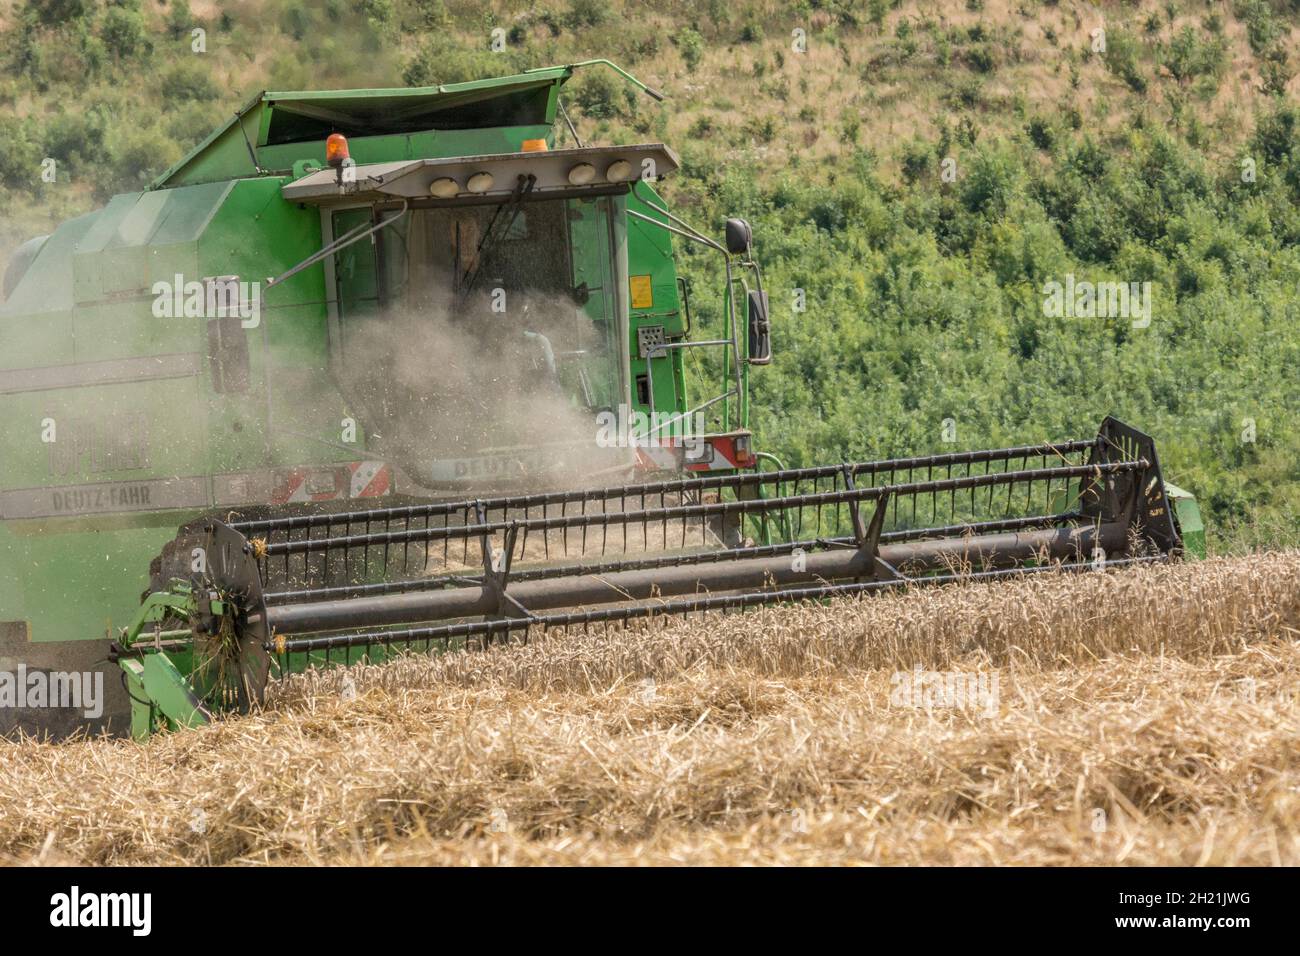 Combine harvester cutting ripe wheat crop - on sloping ground / field. Metaphor food security / growing food, UK farming and agriculture, wheat supply Stock Photo